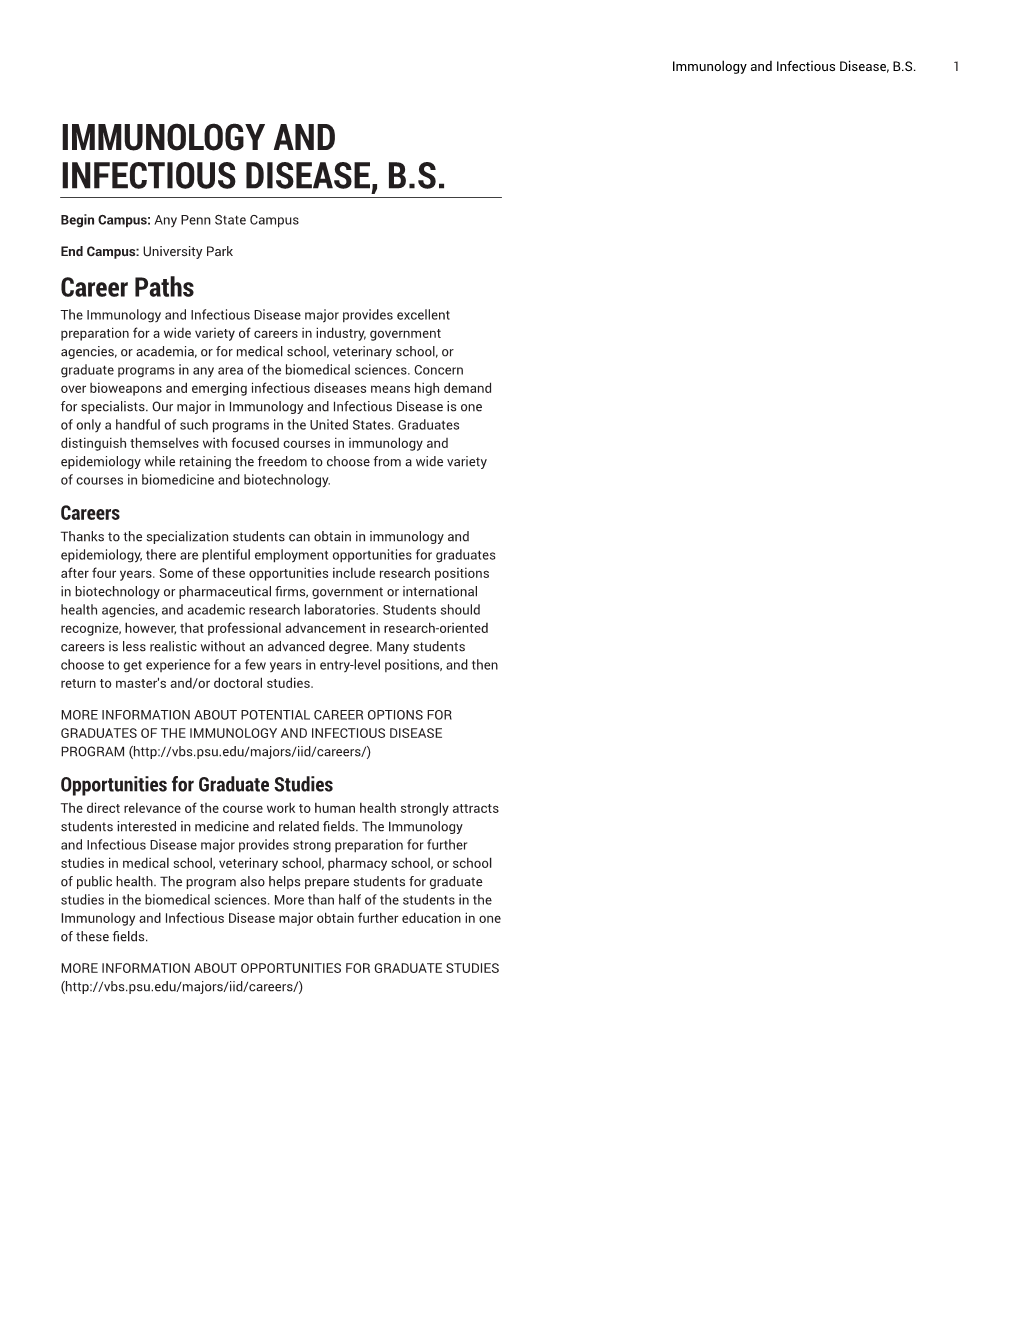 Immunology and Infectious Disease, B.S. 1